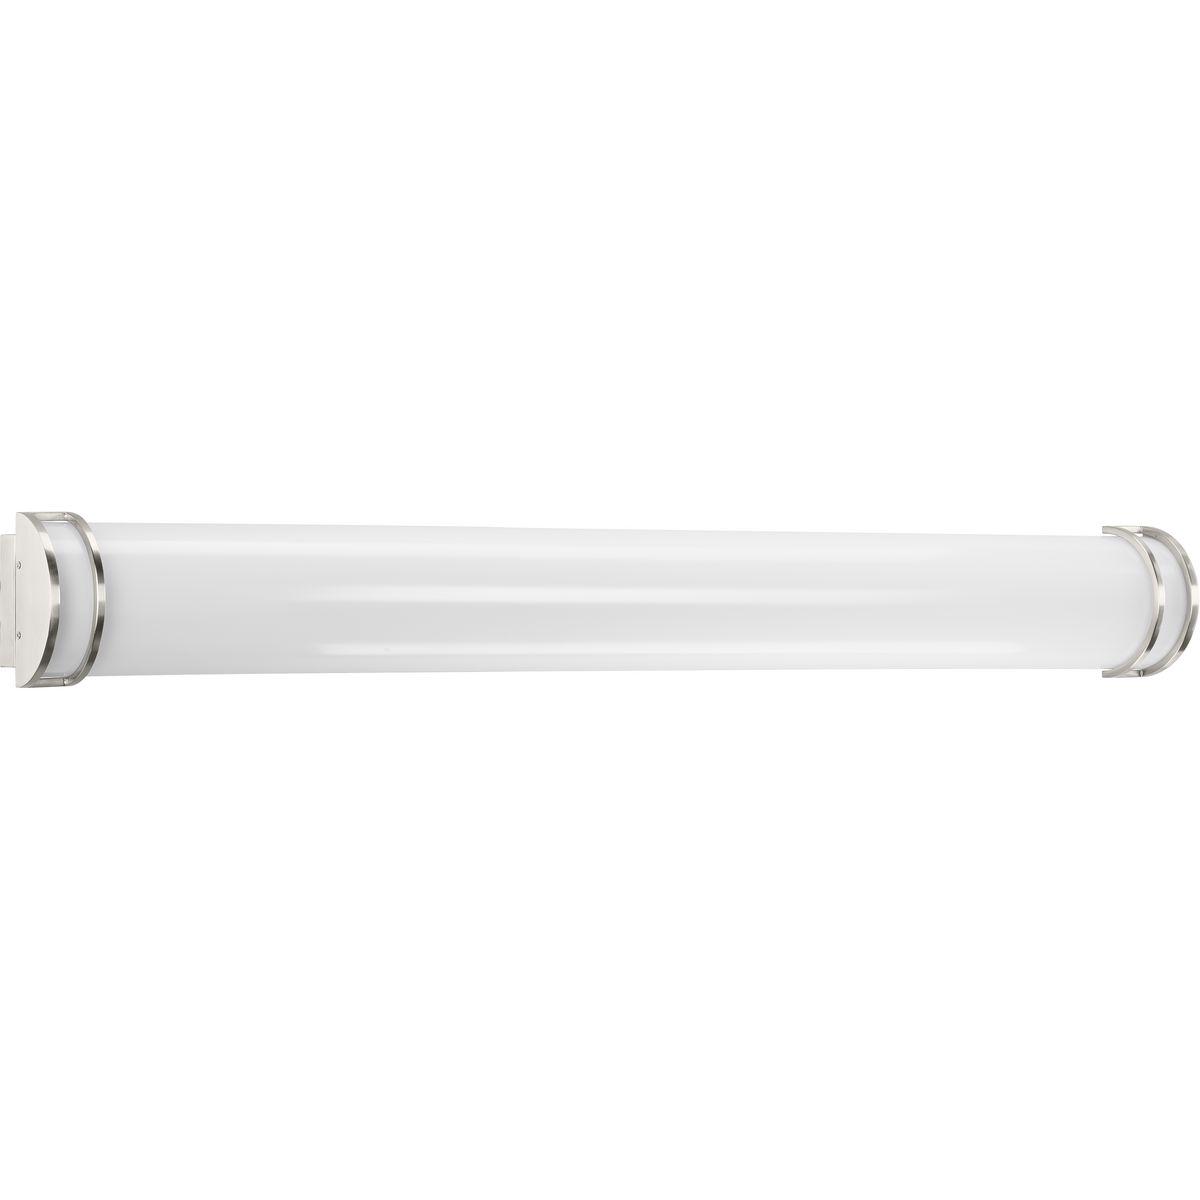 Hubbell P300244-009-30 This LED bath light offers a taste of subtle sophistication to any design. Beautiful brushed nickel bands cap each end of the shade for a clean, modern aesthetic. The shade includes an integrated 37w LED source provides energy and cost savings benefits.  